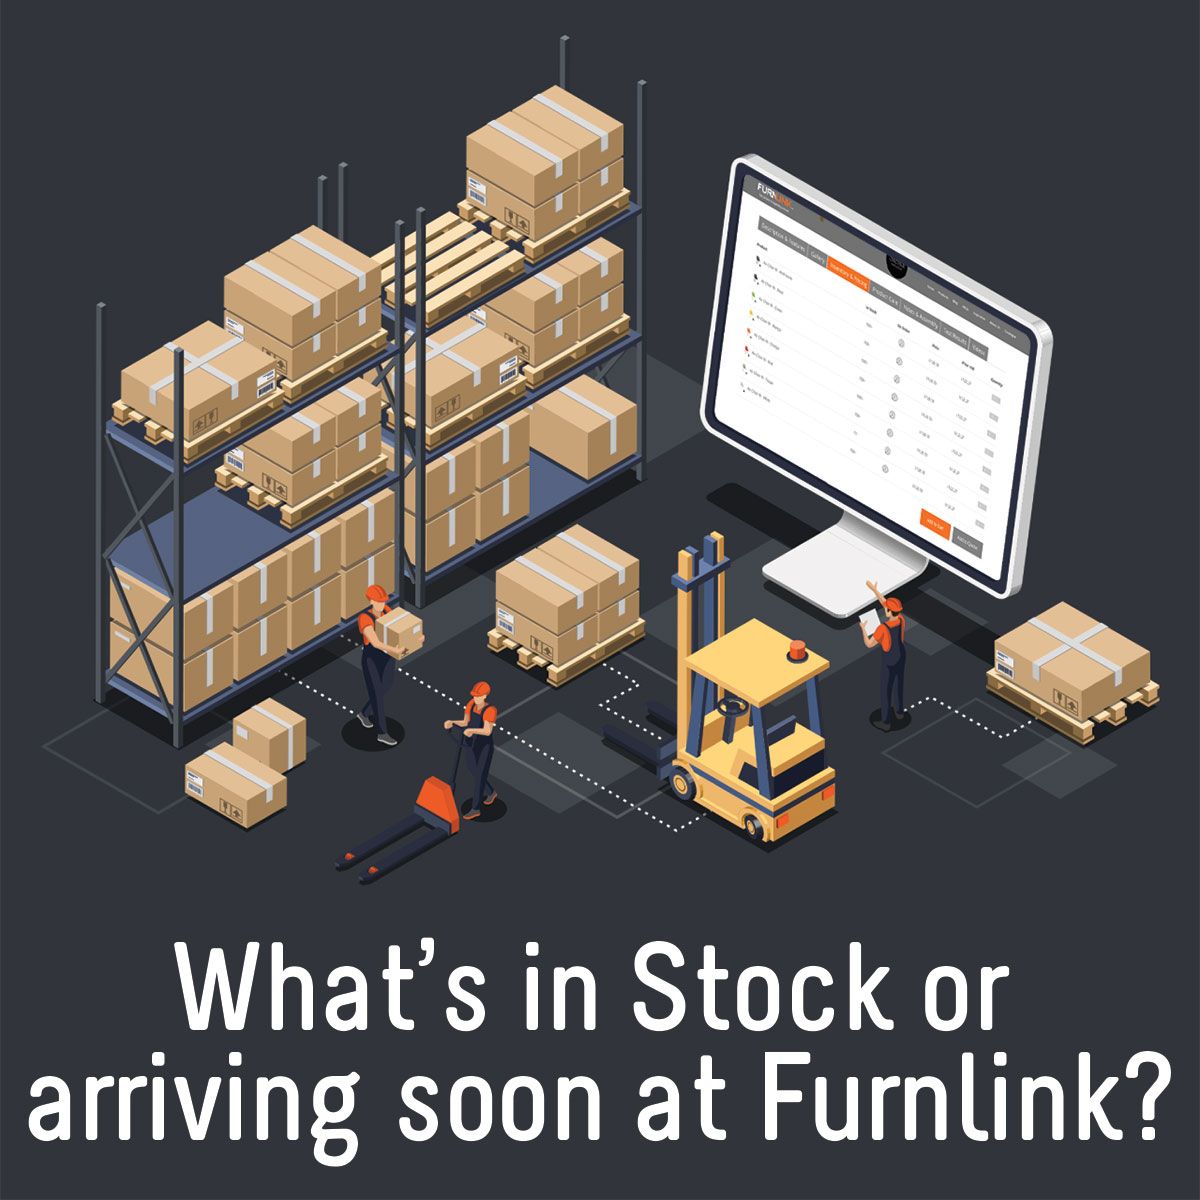 What’s in Stock or arriving soon at Furnlink?